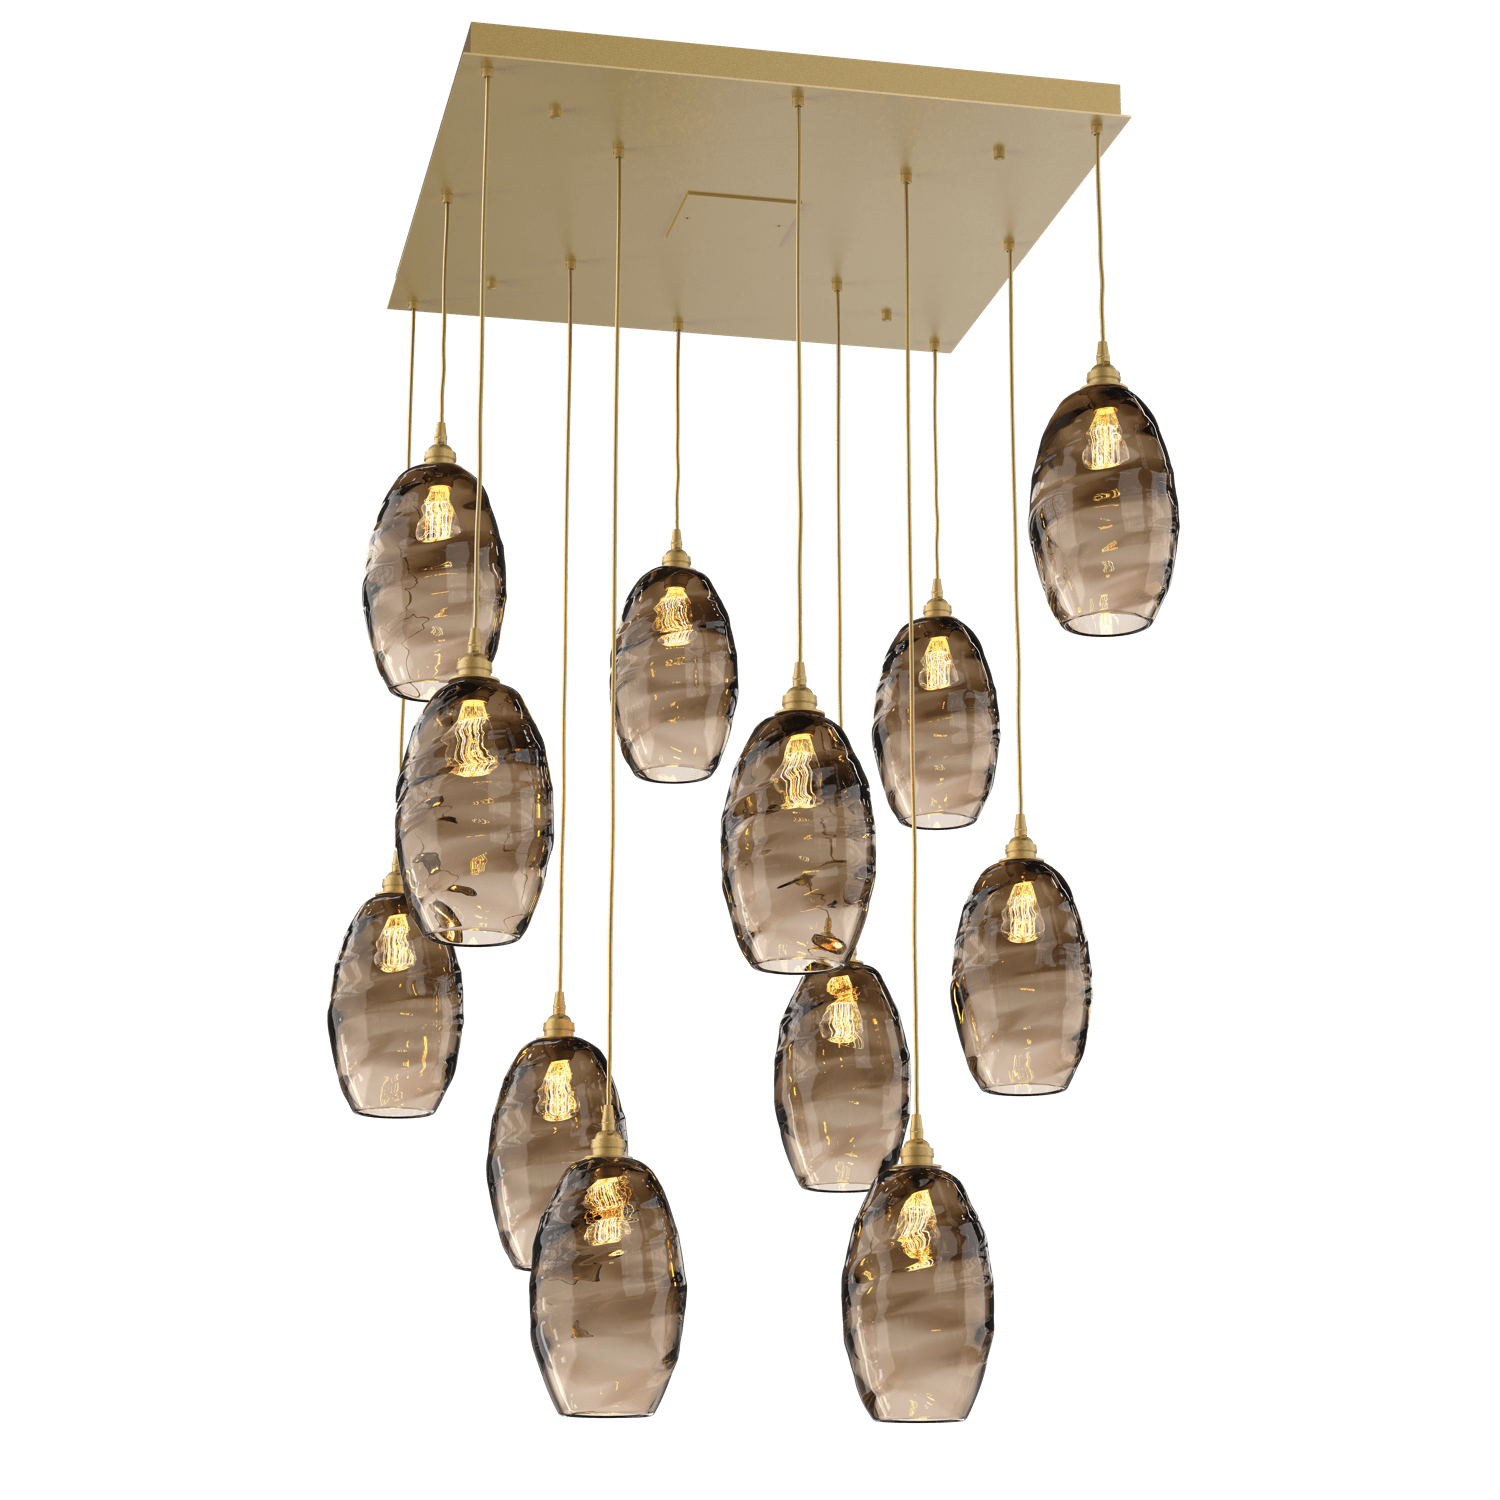 CHB0035-12-GB-OB-Hammerton-Studio-Optic-Blown-Glass-Elisse-12-light-square-pendant-chandelier-with-gilded-brass-finish-and-optic-bronze-blown-glass-shades-and-incandescent-lamping